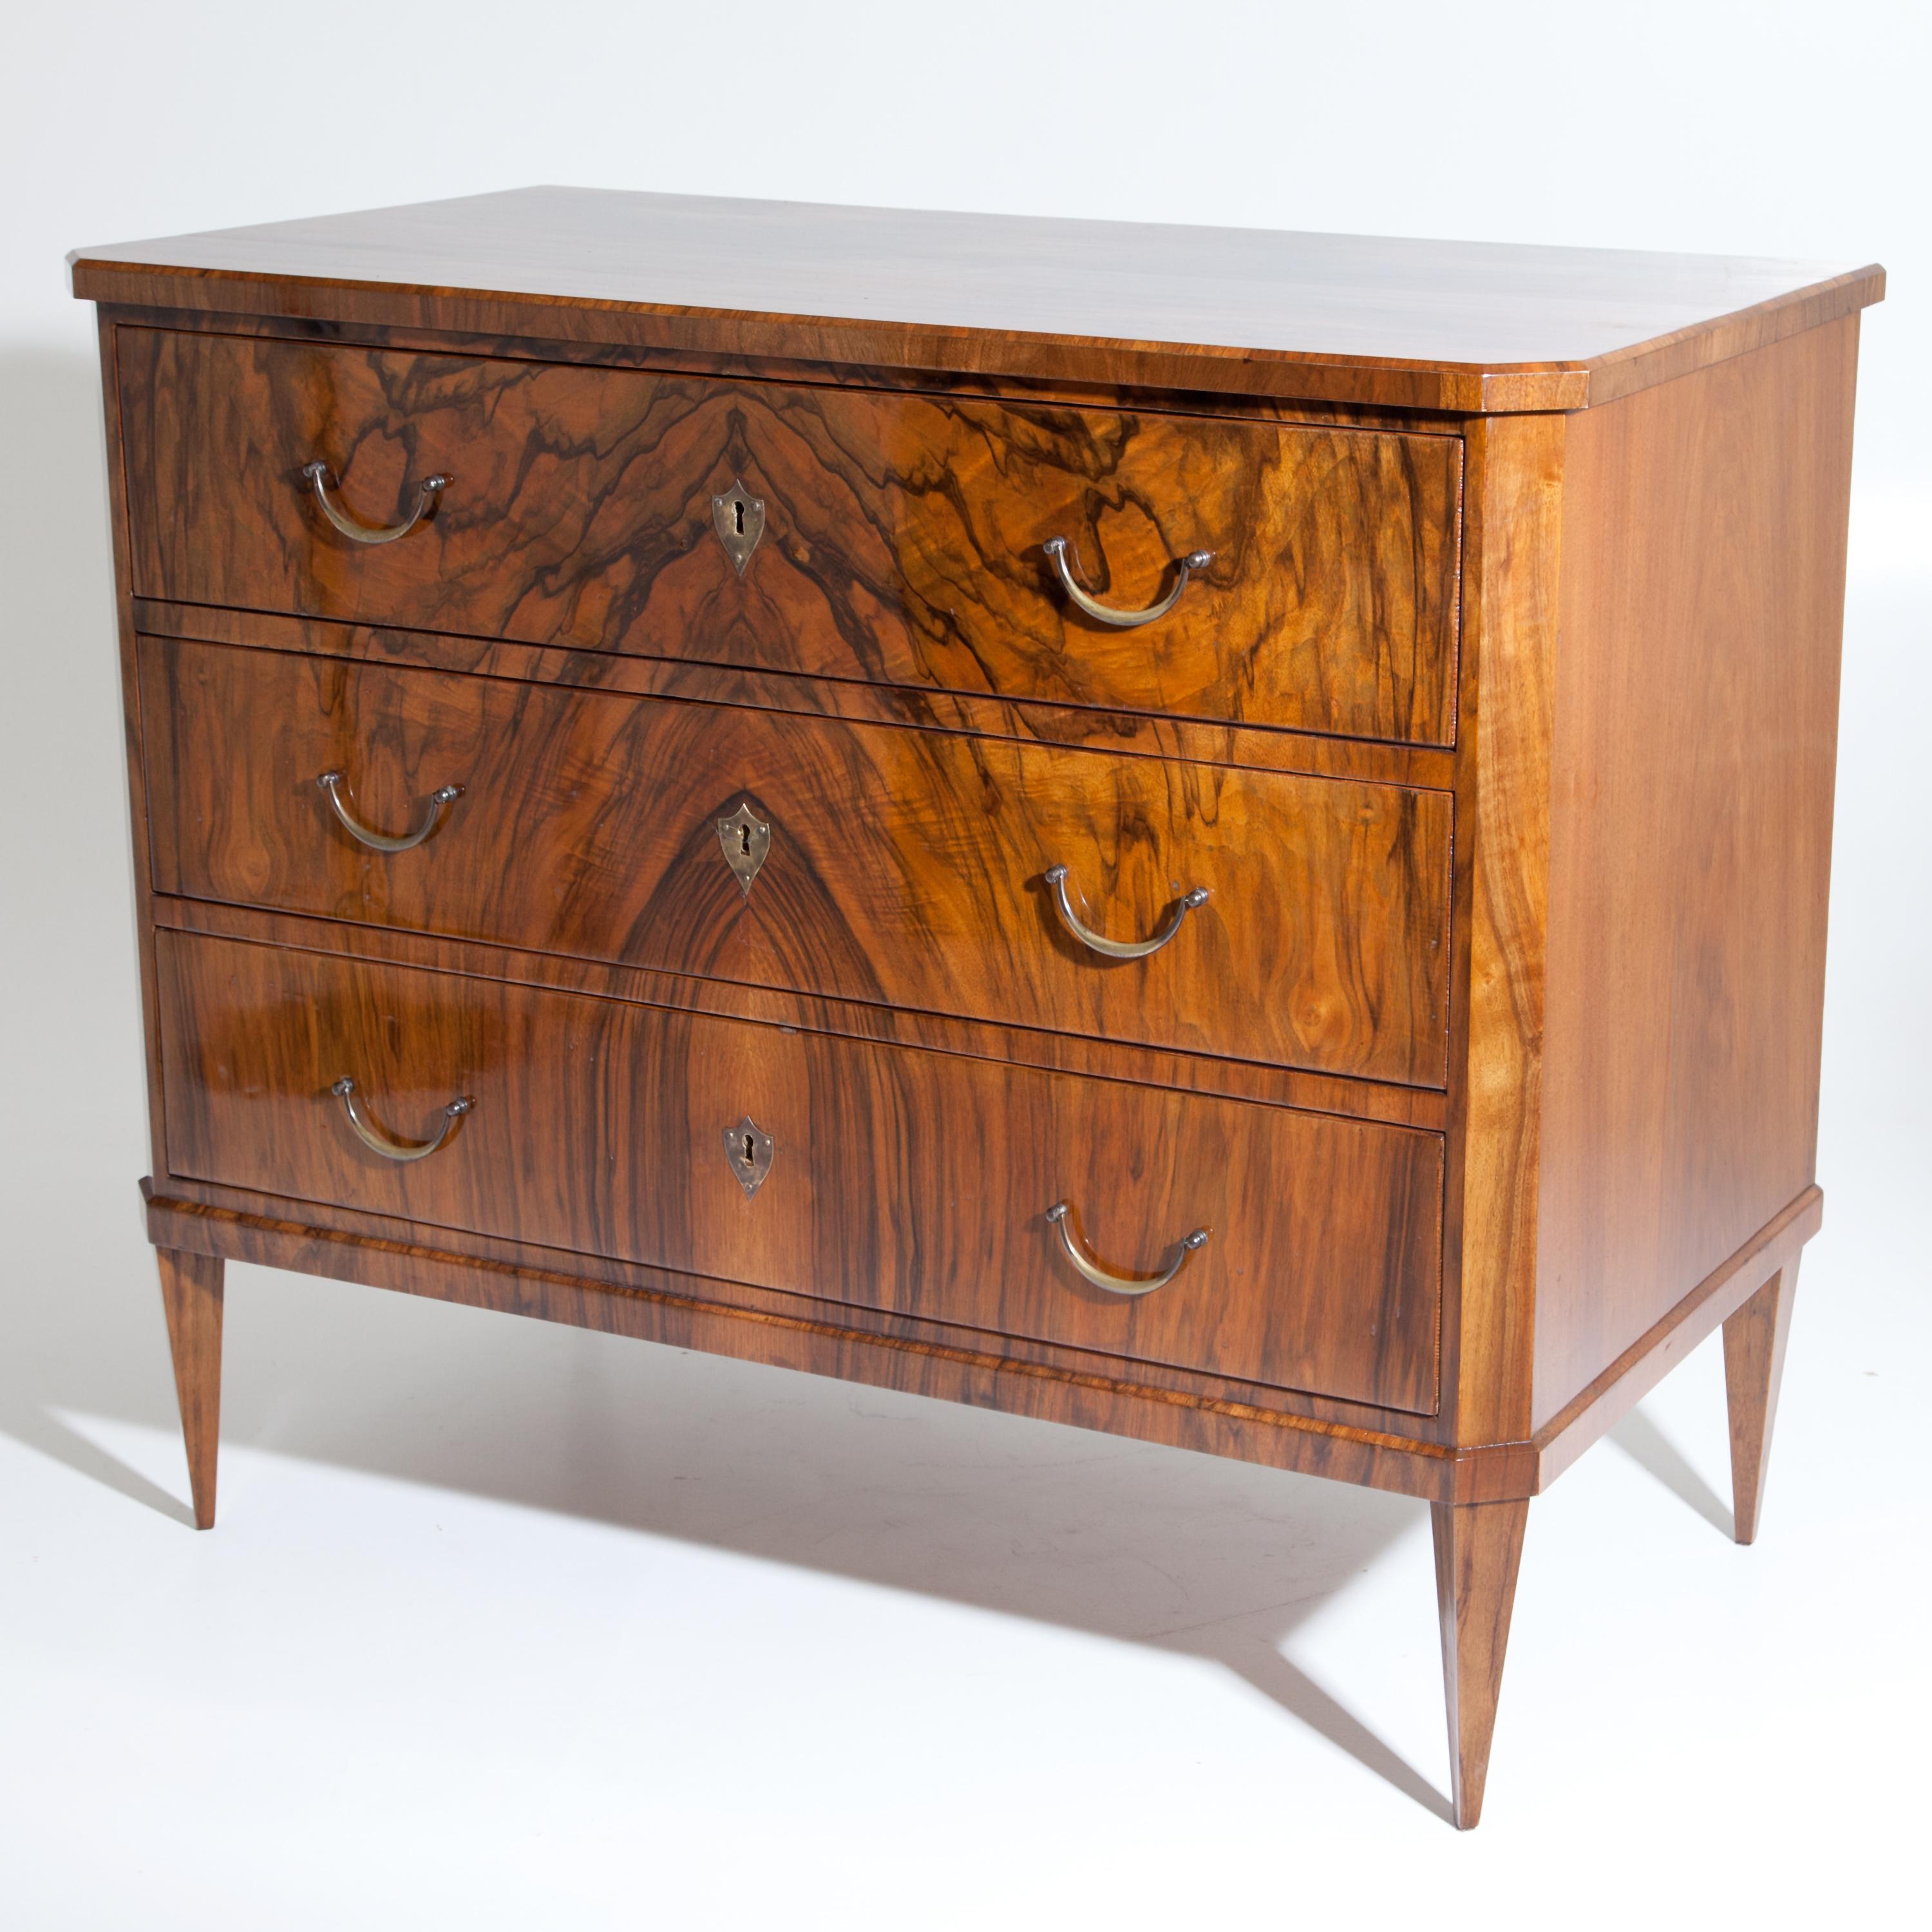 Chest of drawers standing on square pointed feet with three drawers and bevelled corners. The beautiful walnut veneer is mirrored on the front. Expertly restored condition. Fittings are recent.